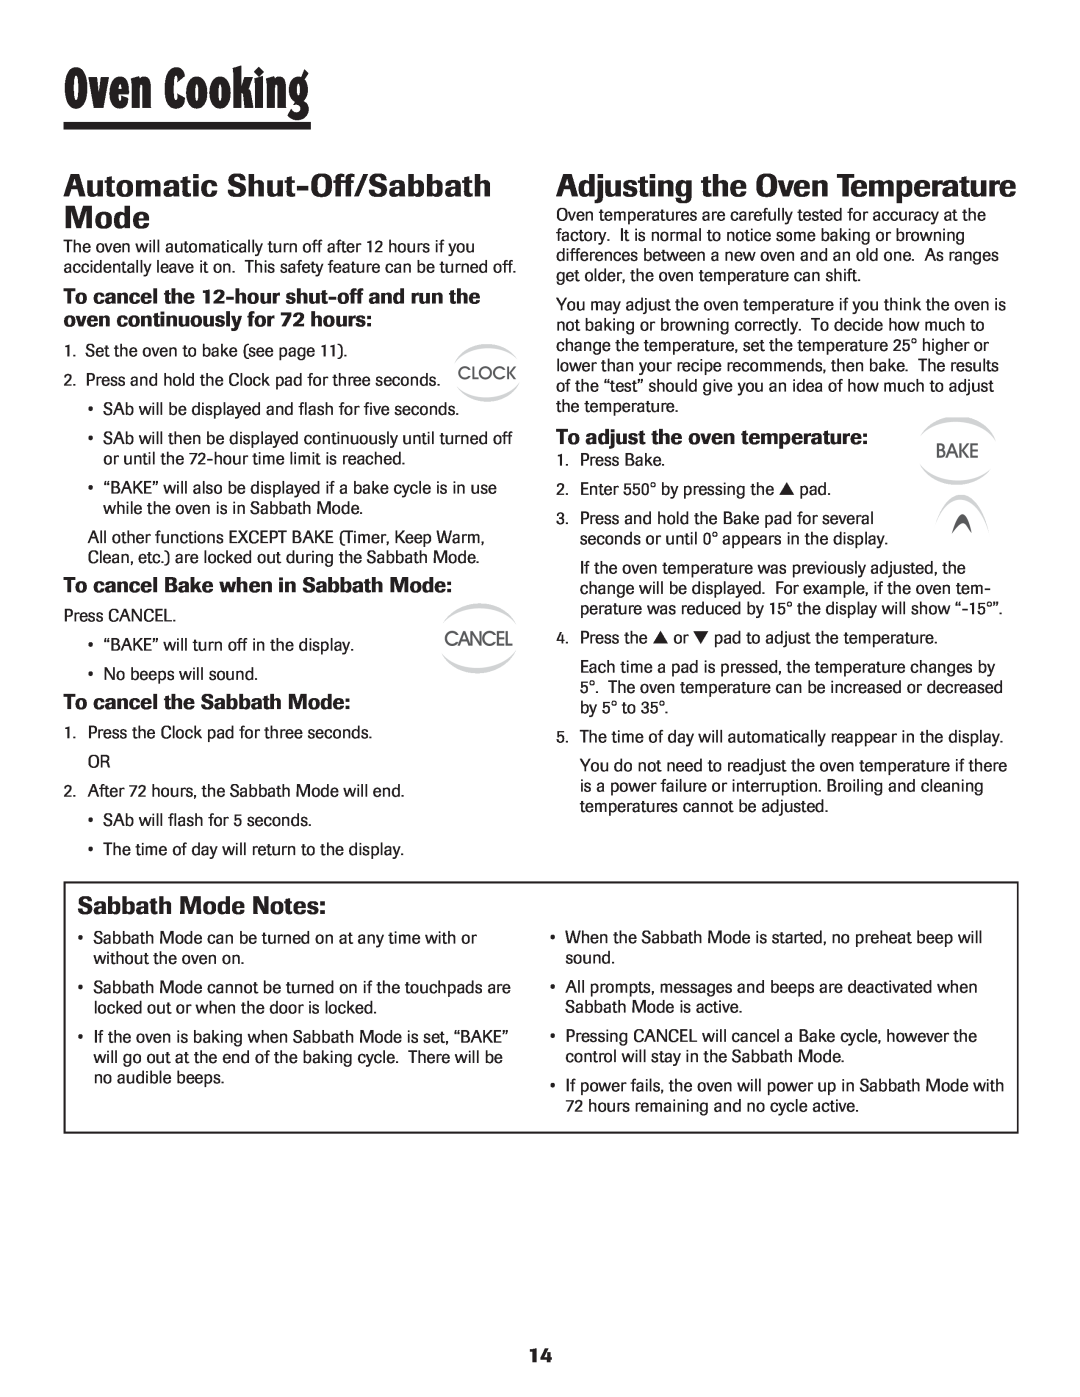 Maytag Automatic Shut-Off/SabbathMode, Adjusting the Oven Temperature, Sabbath Mode Notes, To cancel the Sabbath Mode 